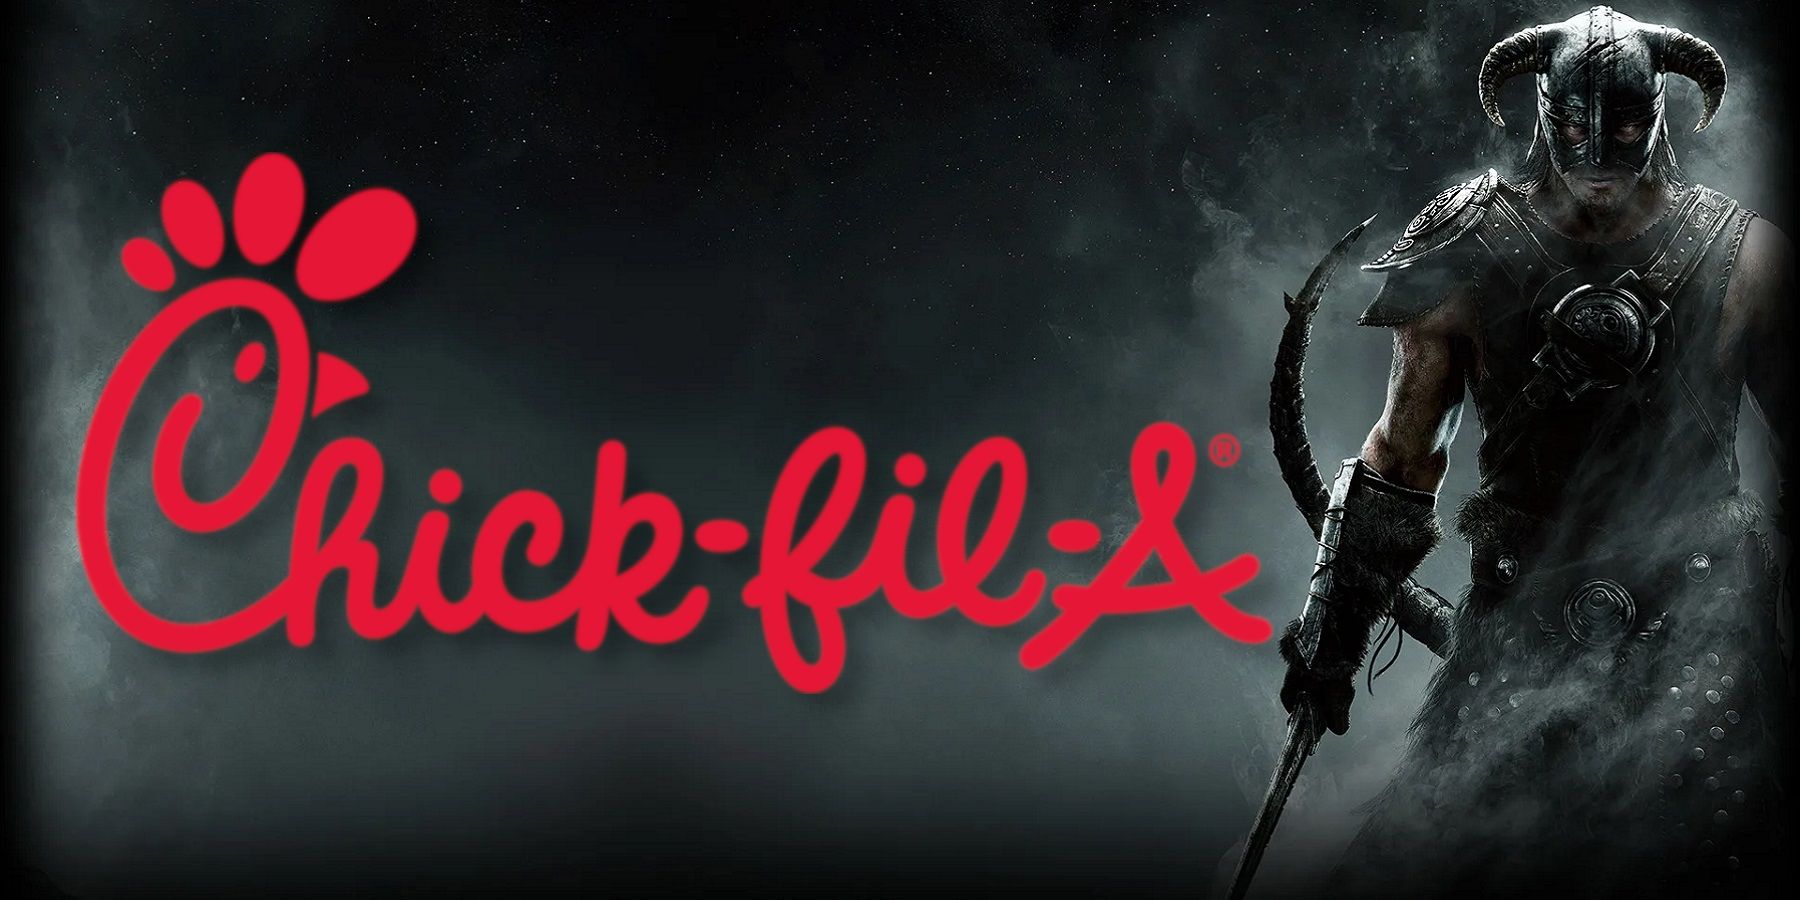 A wallpaper image from Skyrim showing the Dragonborn to one side and the Chick Fil-A logo in the middle.